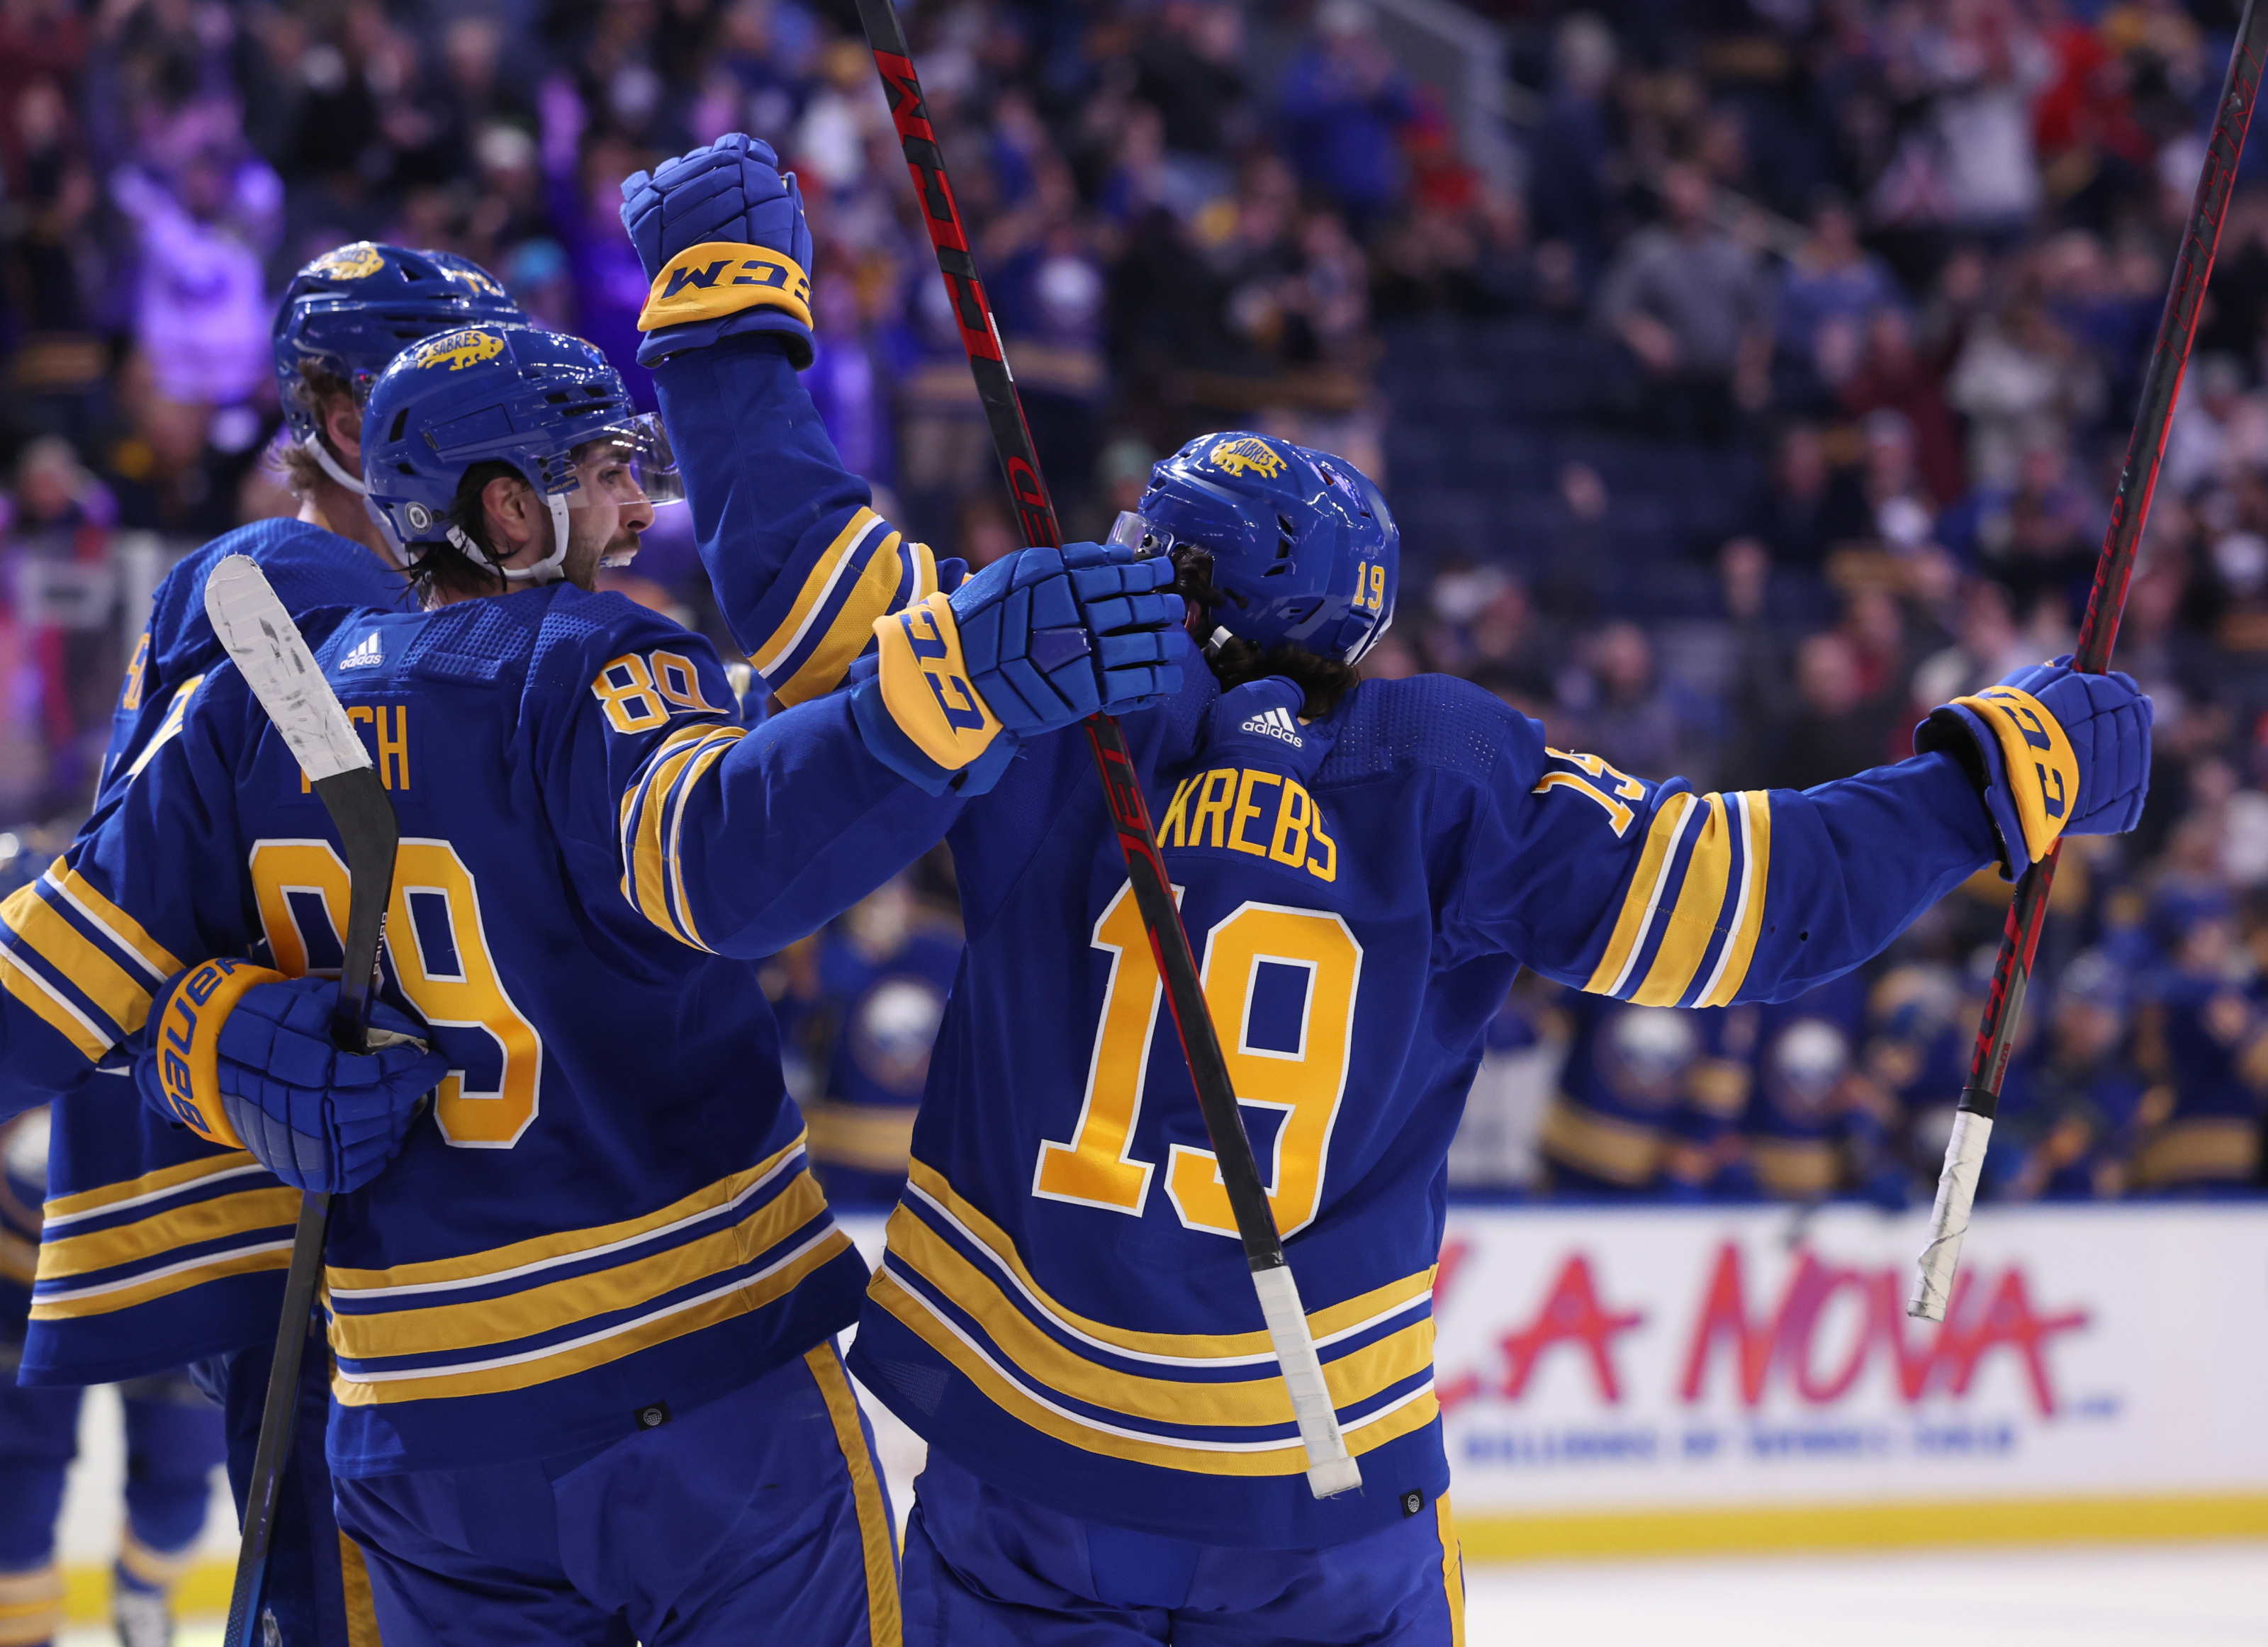 Buffalo Sabres - With his assist tonight, Jack Eichel has